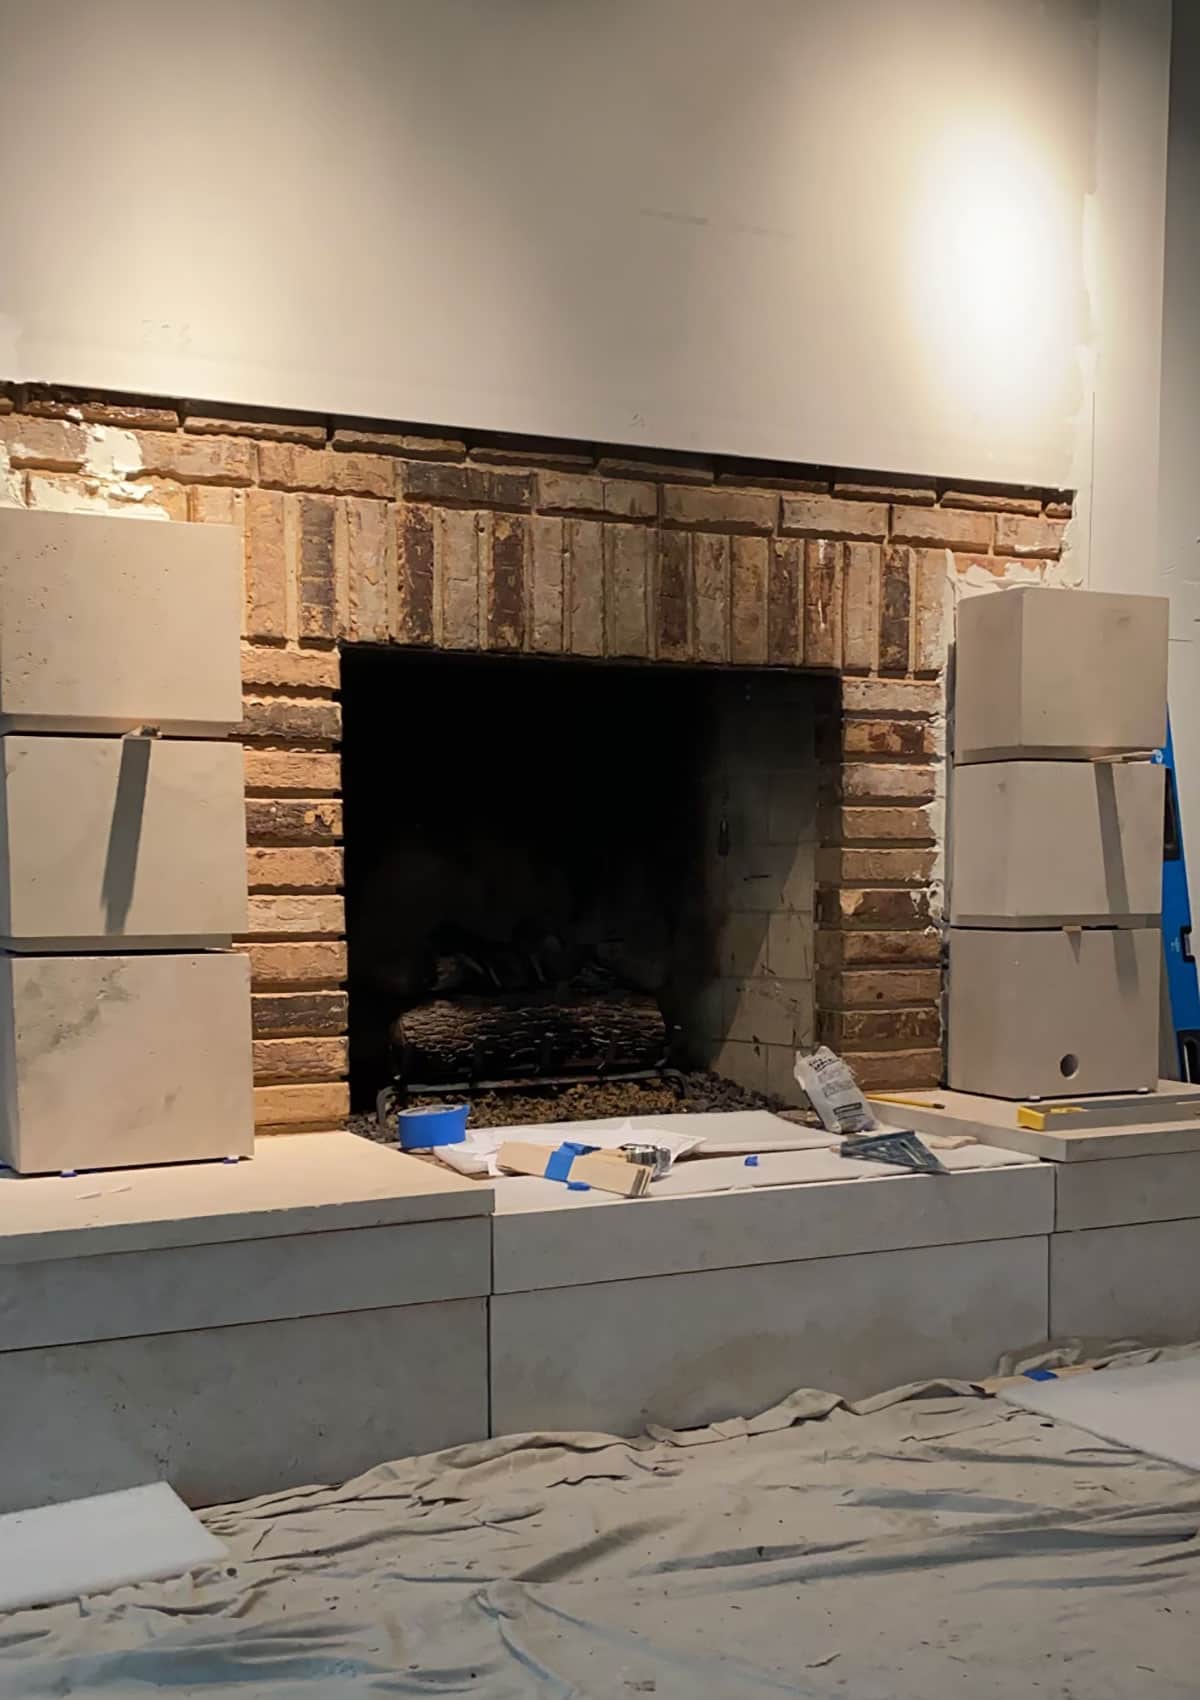 80s Brick Fireplace Before and After - Take a look at this brick fireplace makeover